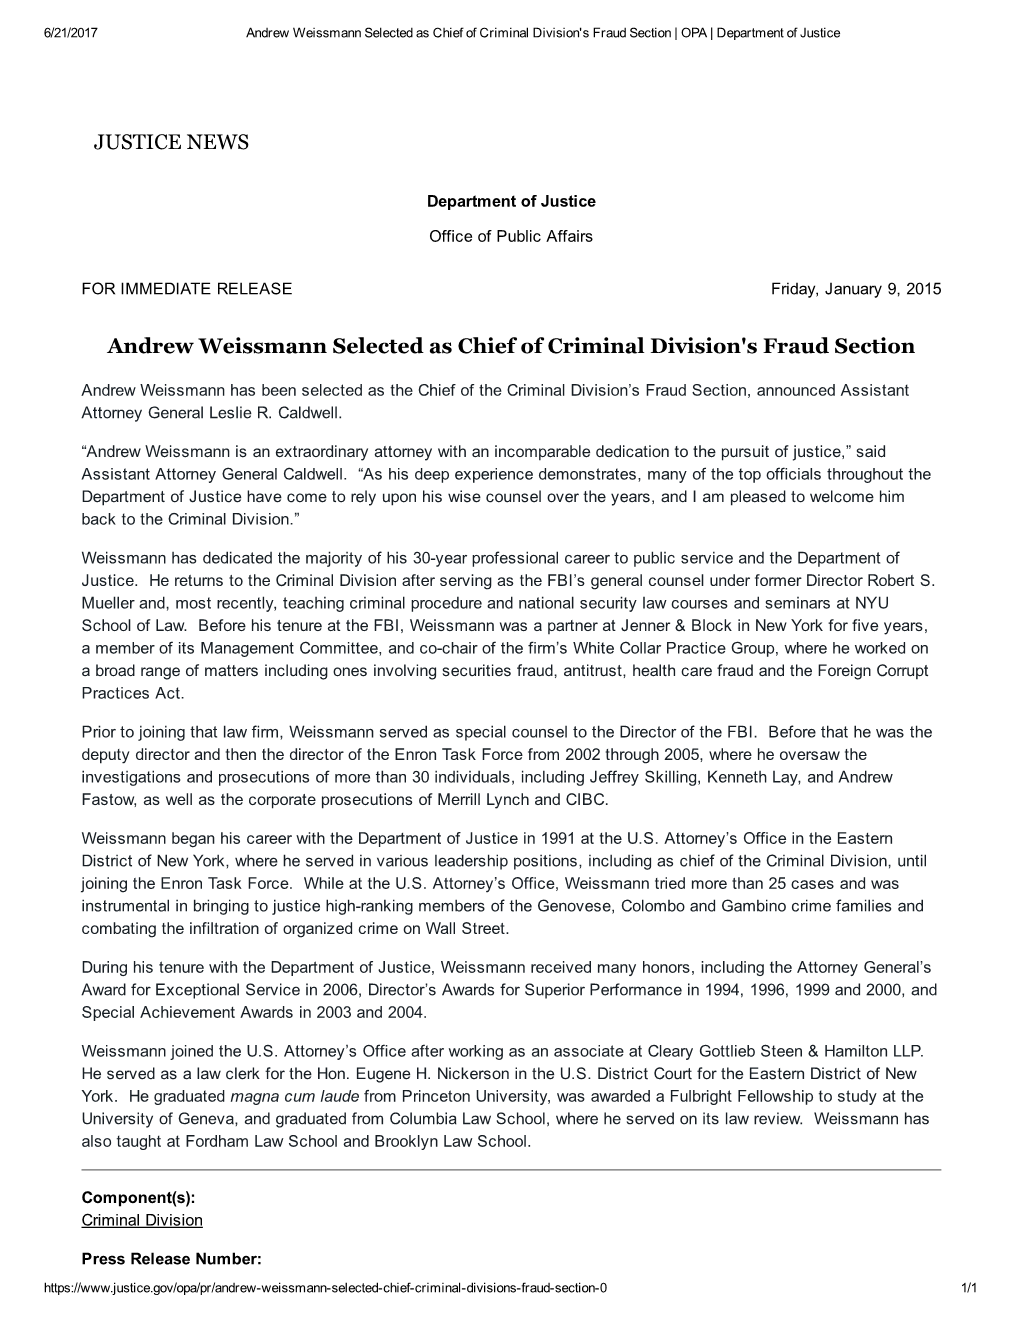 JUSTICE NEWS Andrew Weissmann Selected As Chief of Criminal Division's Fraud Section